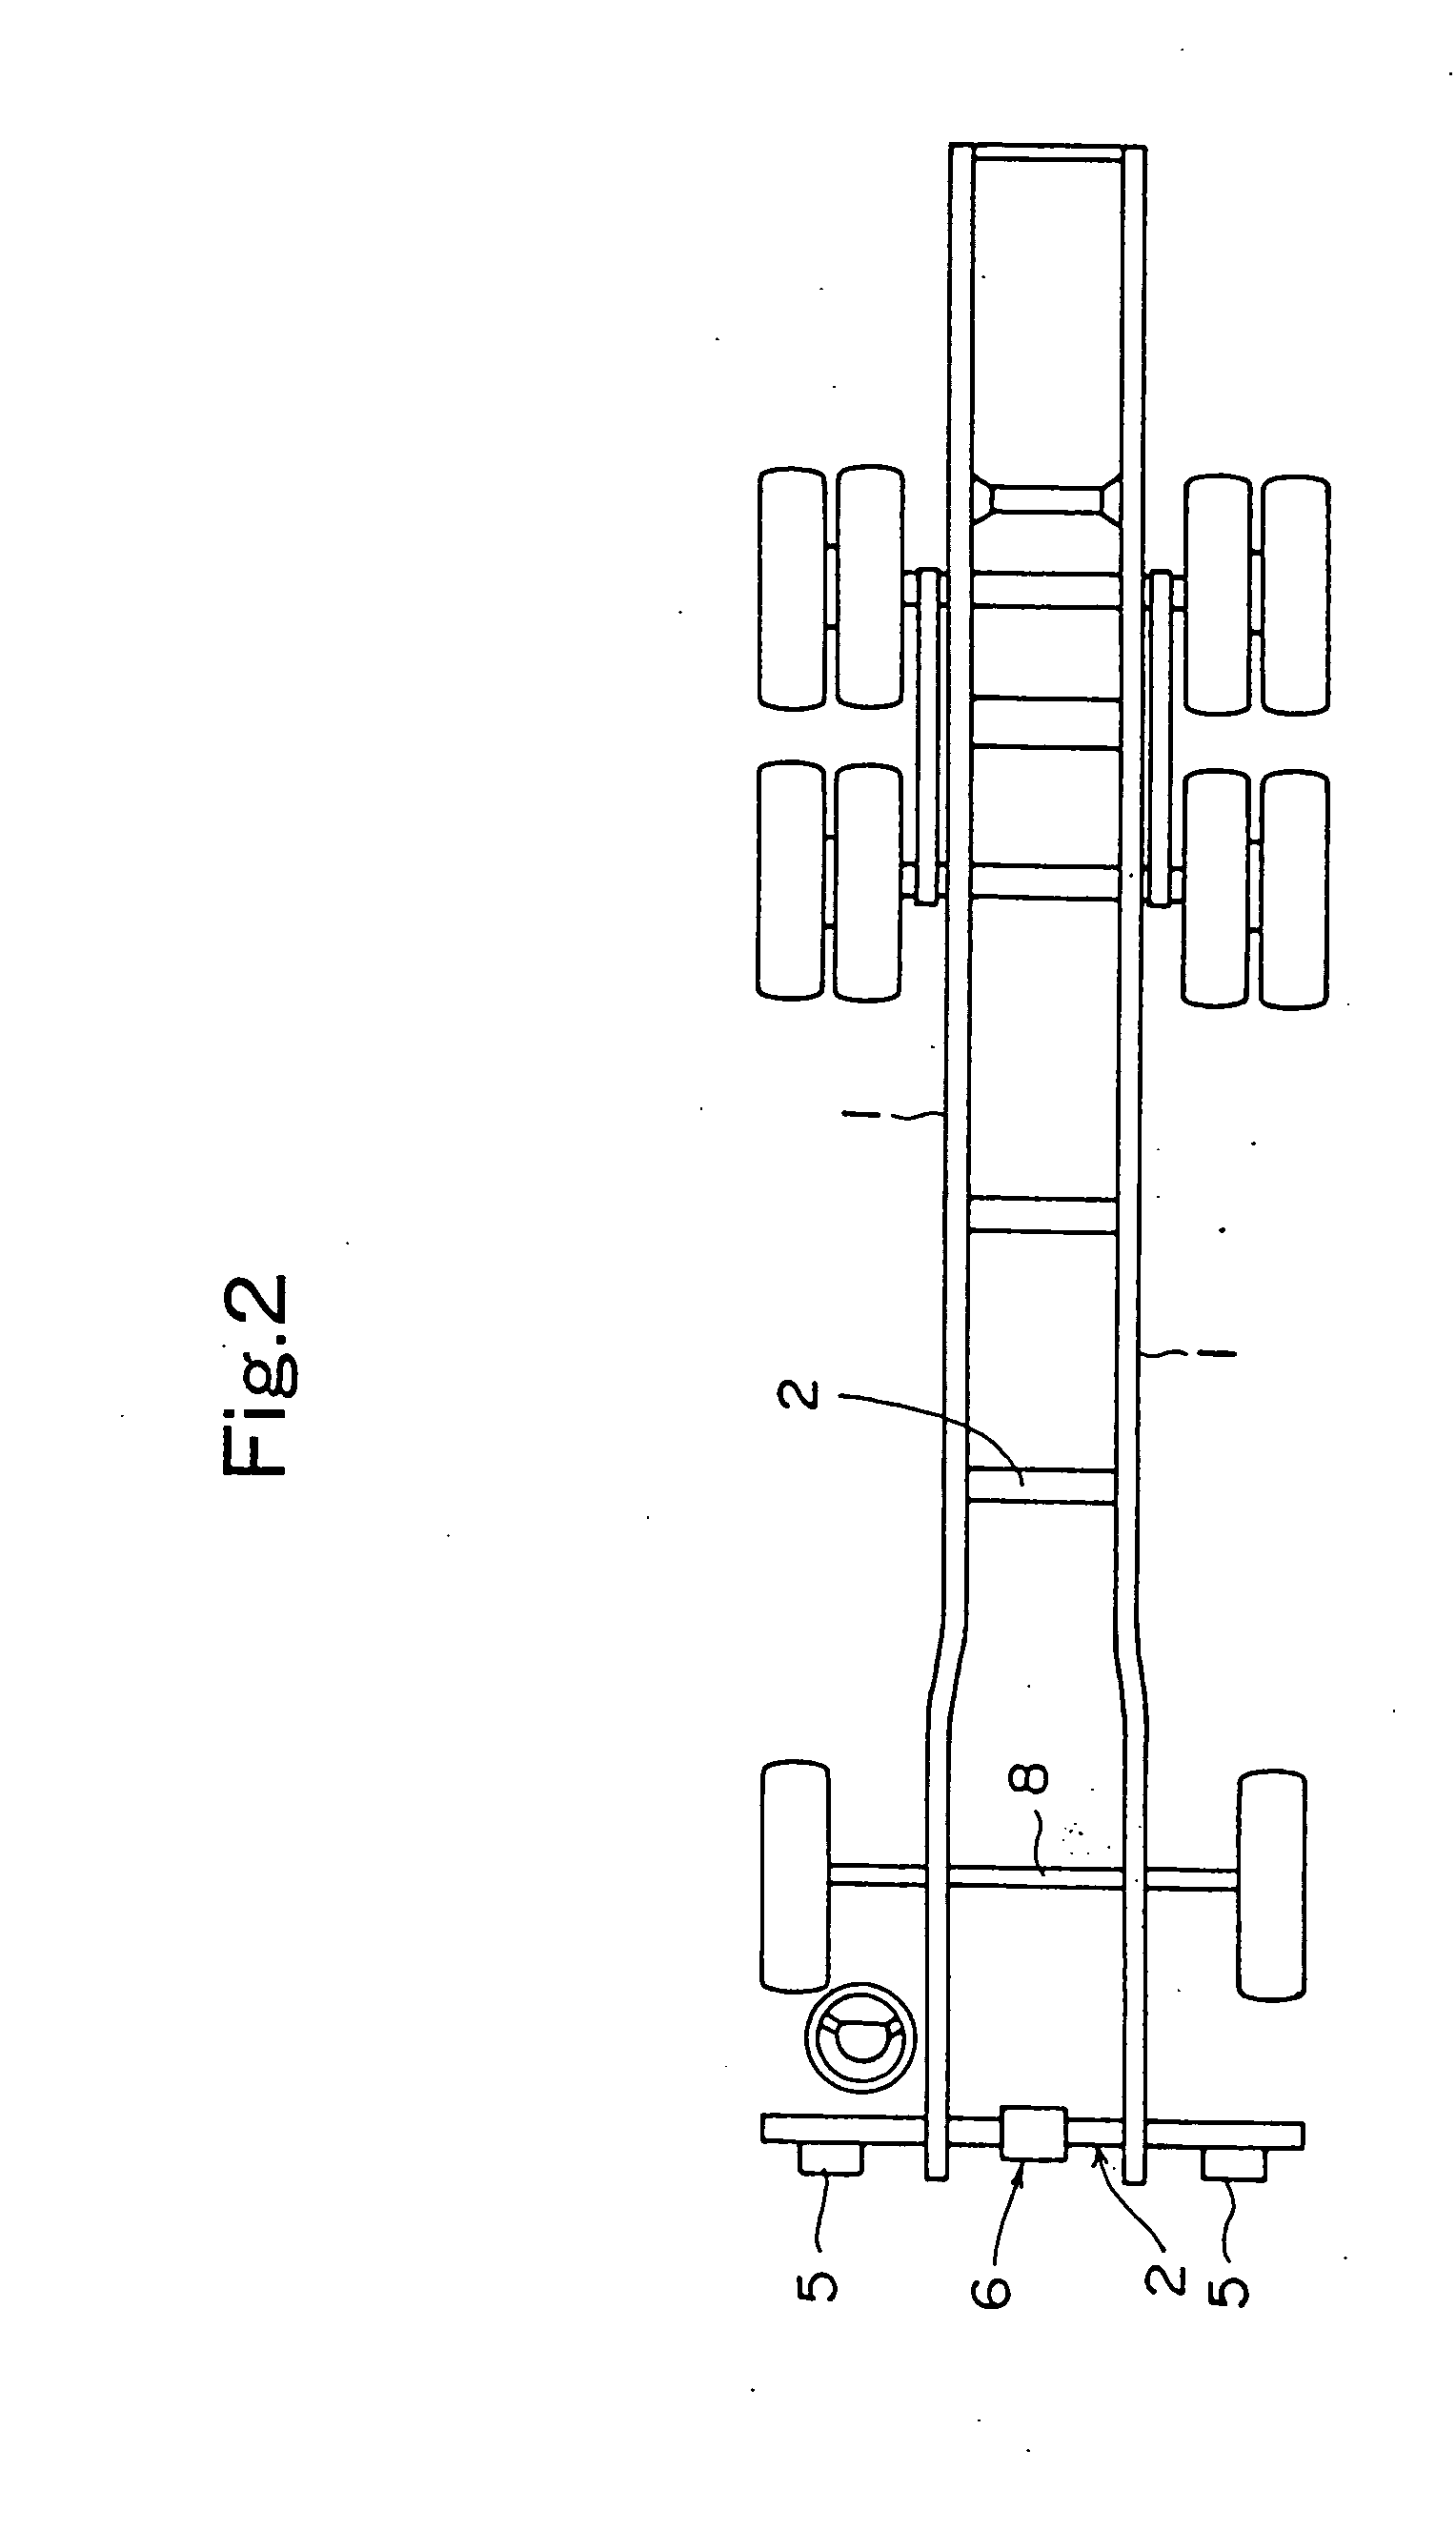 Optical axis control device for vehicle headlamp